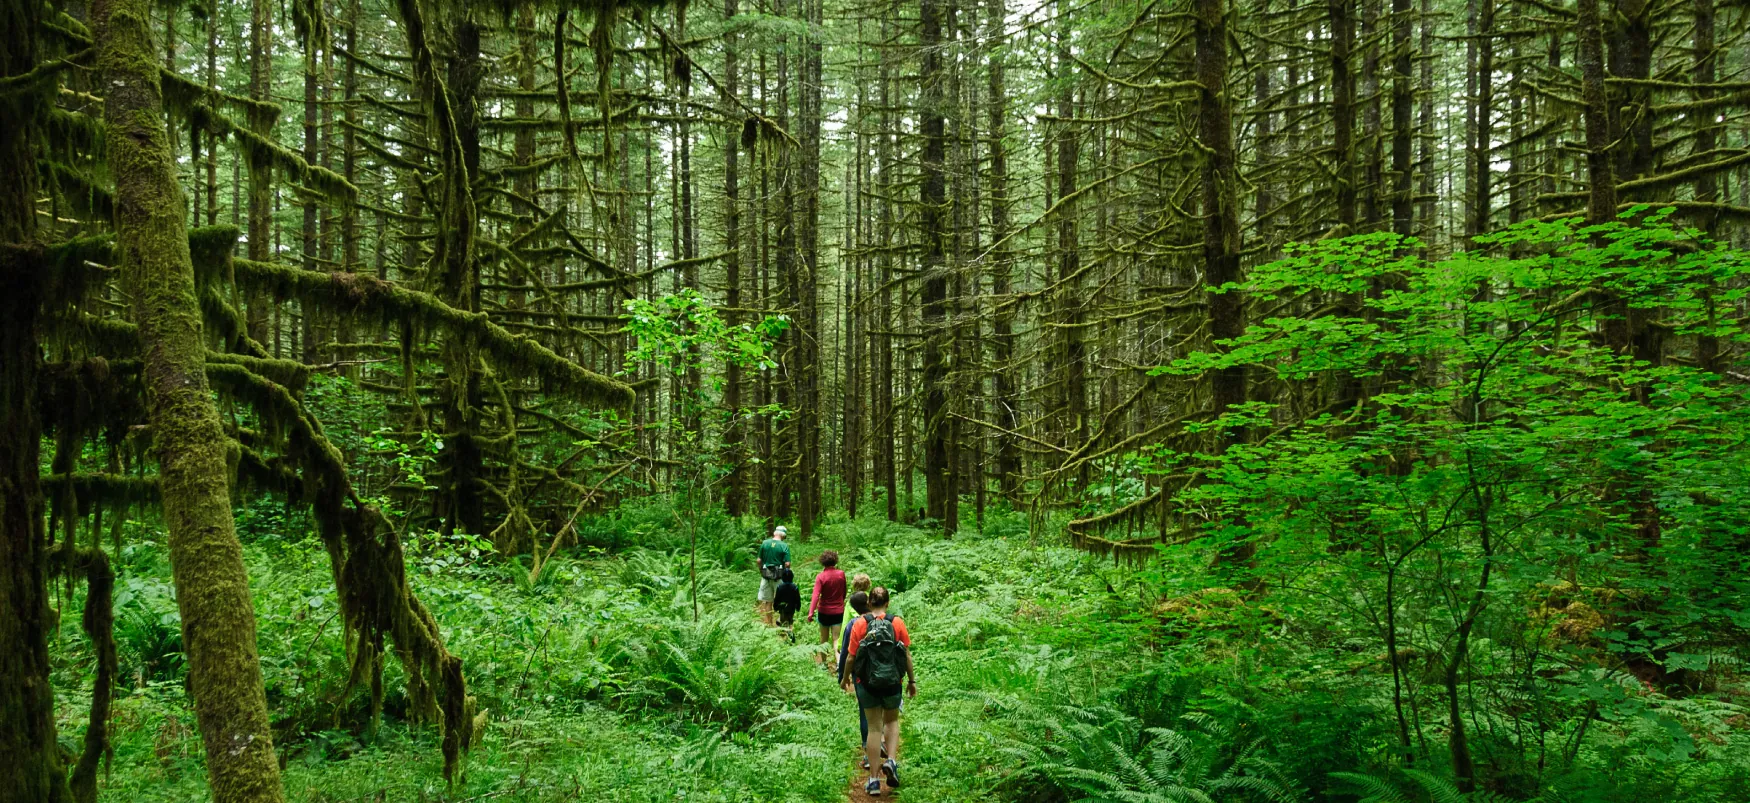 A multi-aged group of hikers with backpacks walks single-file on a path in a forest, surrounded by tall trees, branches covered with green moss, and dense undergrowth of ferns and leafy bushes.